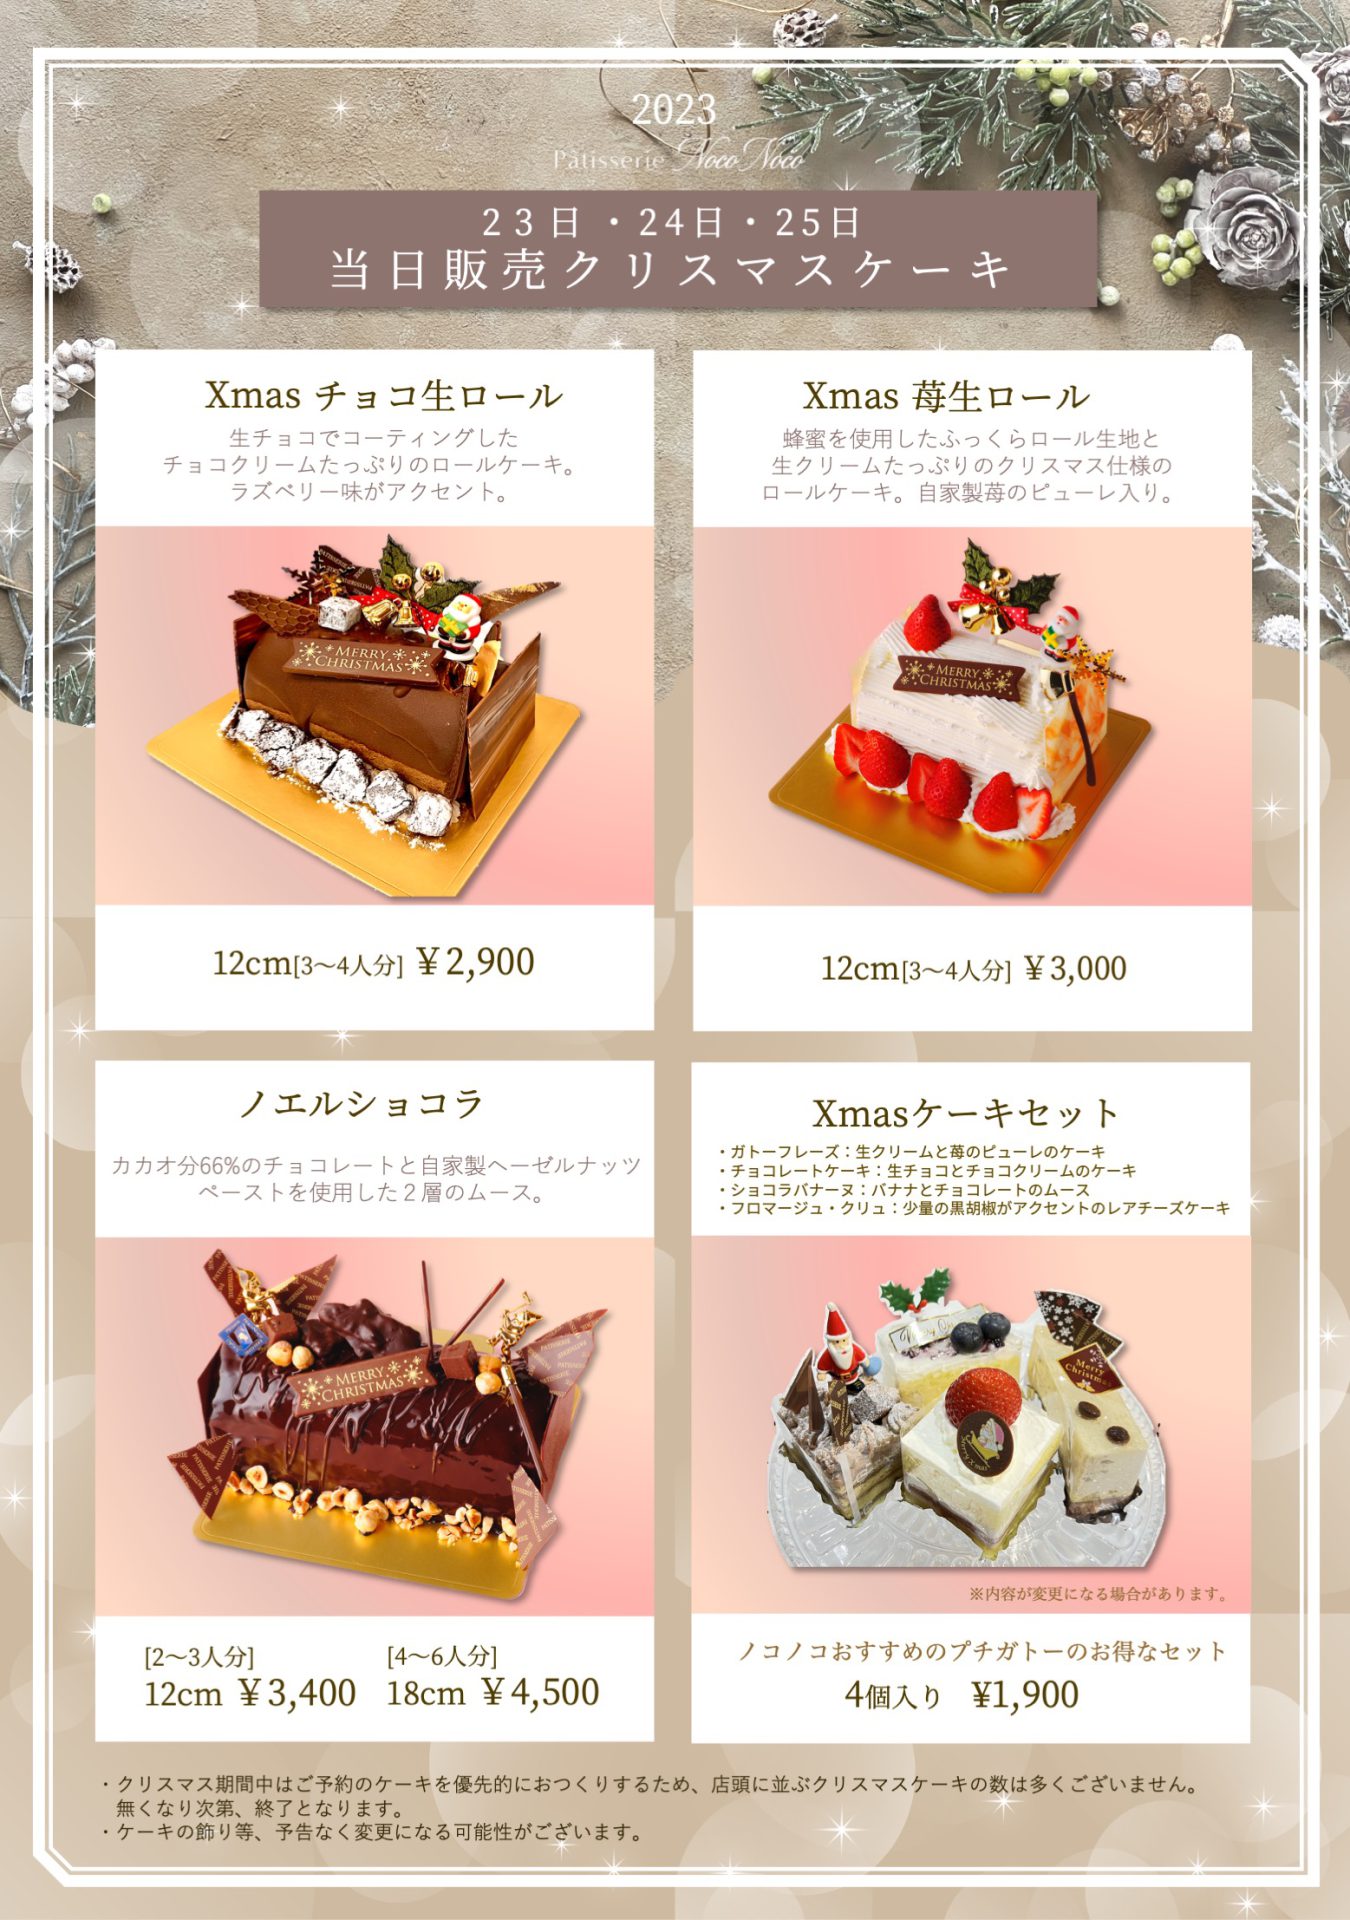 You are currently viewing 2023クリスマスケーキ当日販売のお知らせ